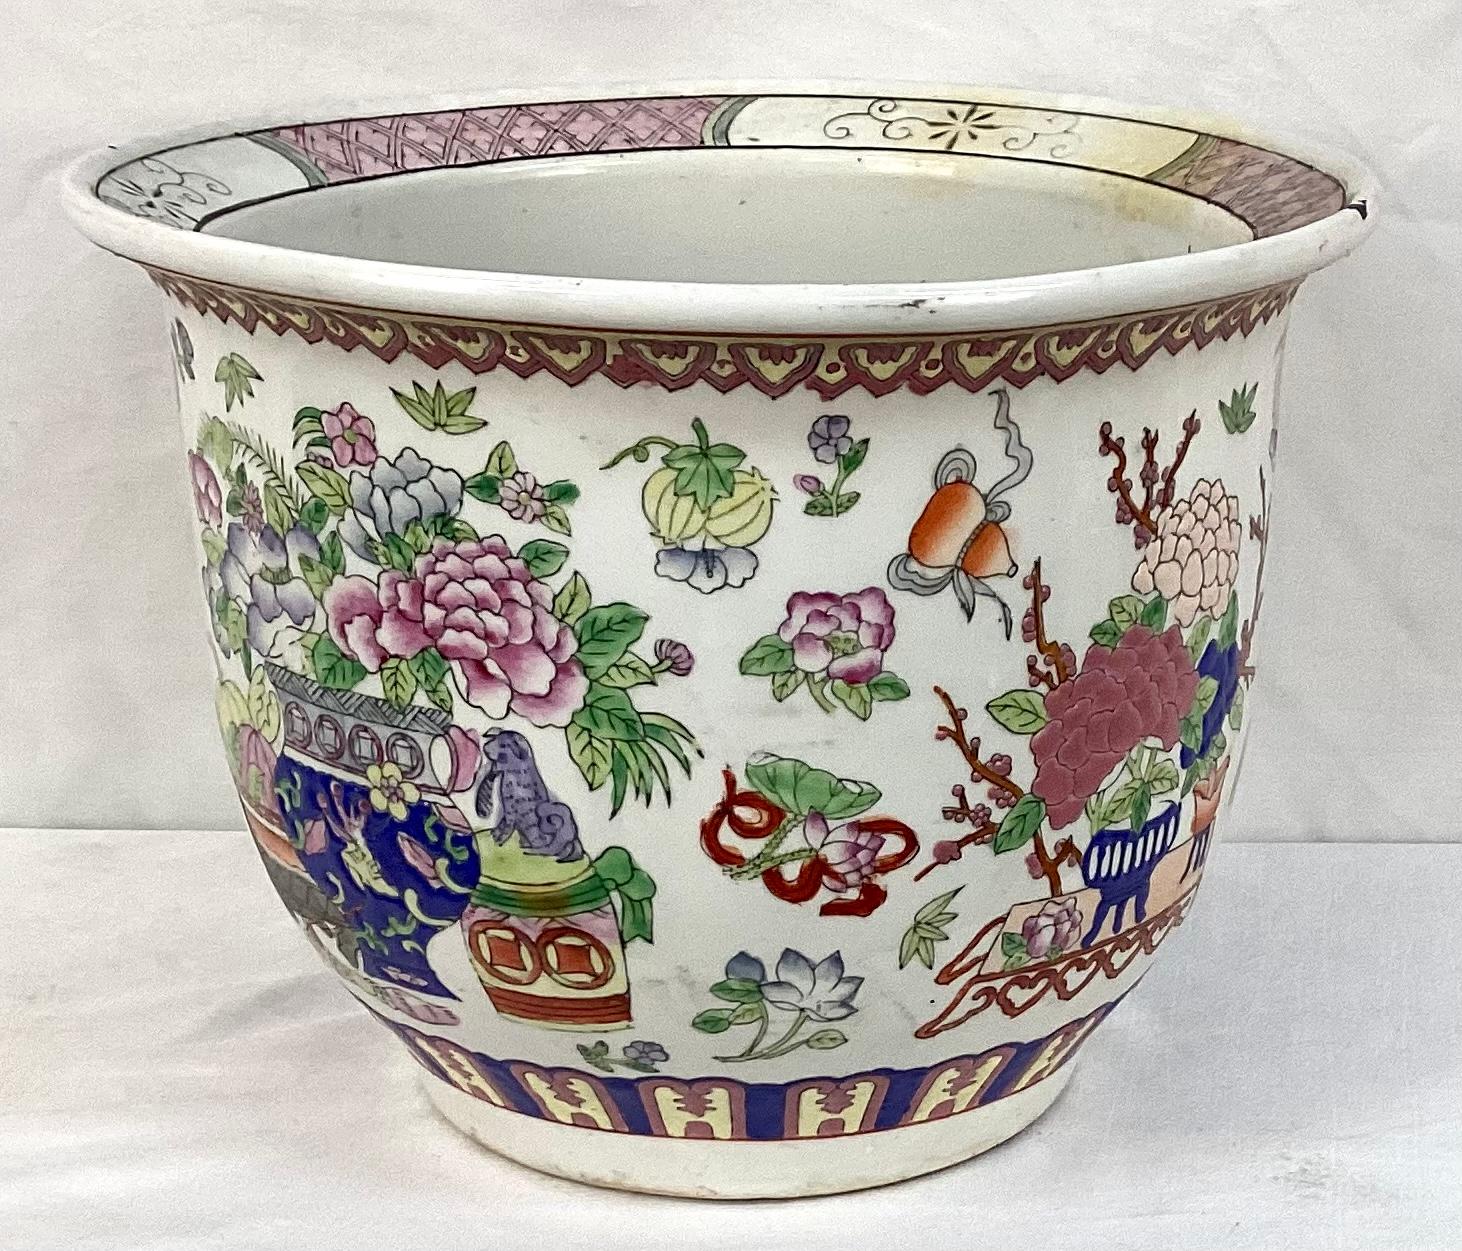 Large colorful vintage Chinese porcelain fishbowl/planter from the Qing period. Features classic oriental floral motif. Overall, the piece is in wonderful condition with a beautiful vivid multi-color palette.

Dimensions
10